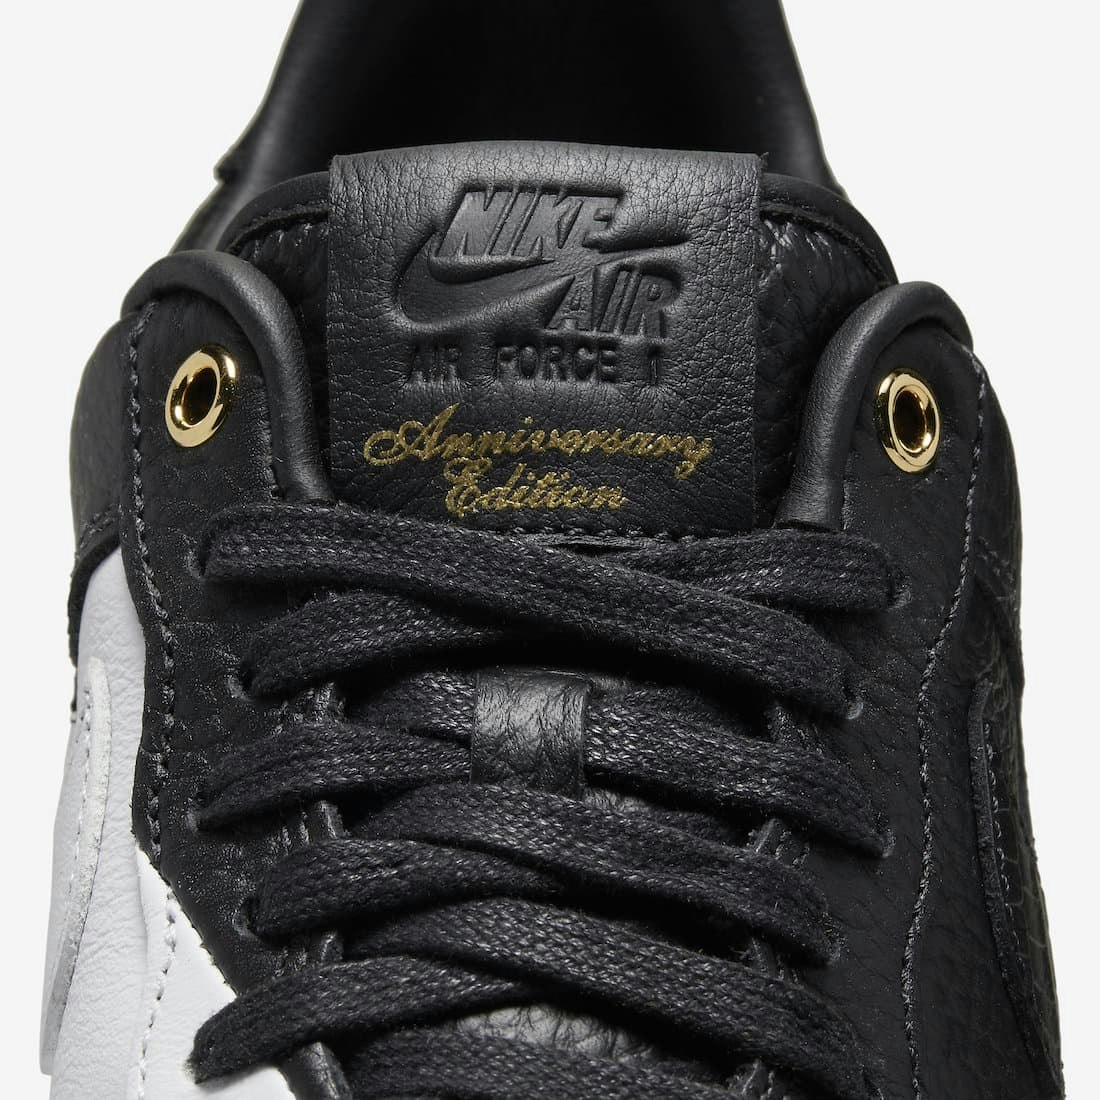 Nike Air Force 1 Low “Split Anniversary Edition”